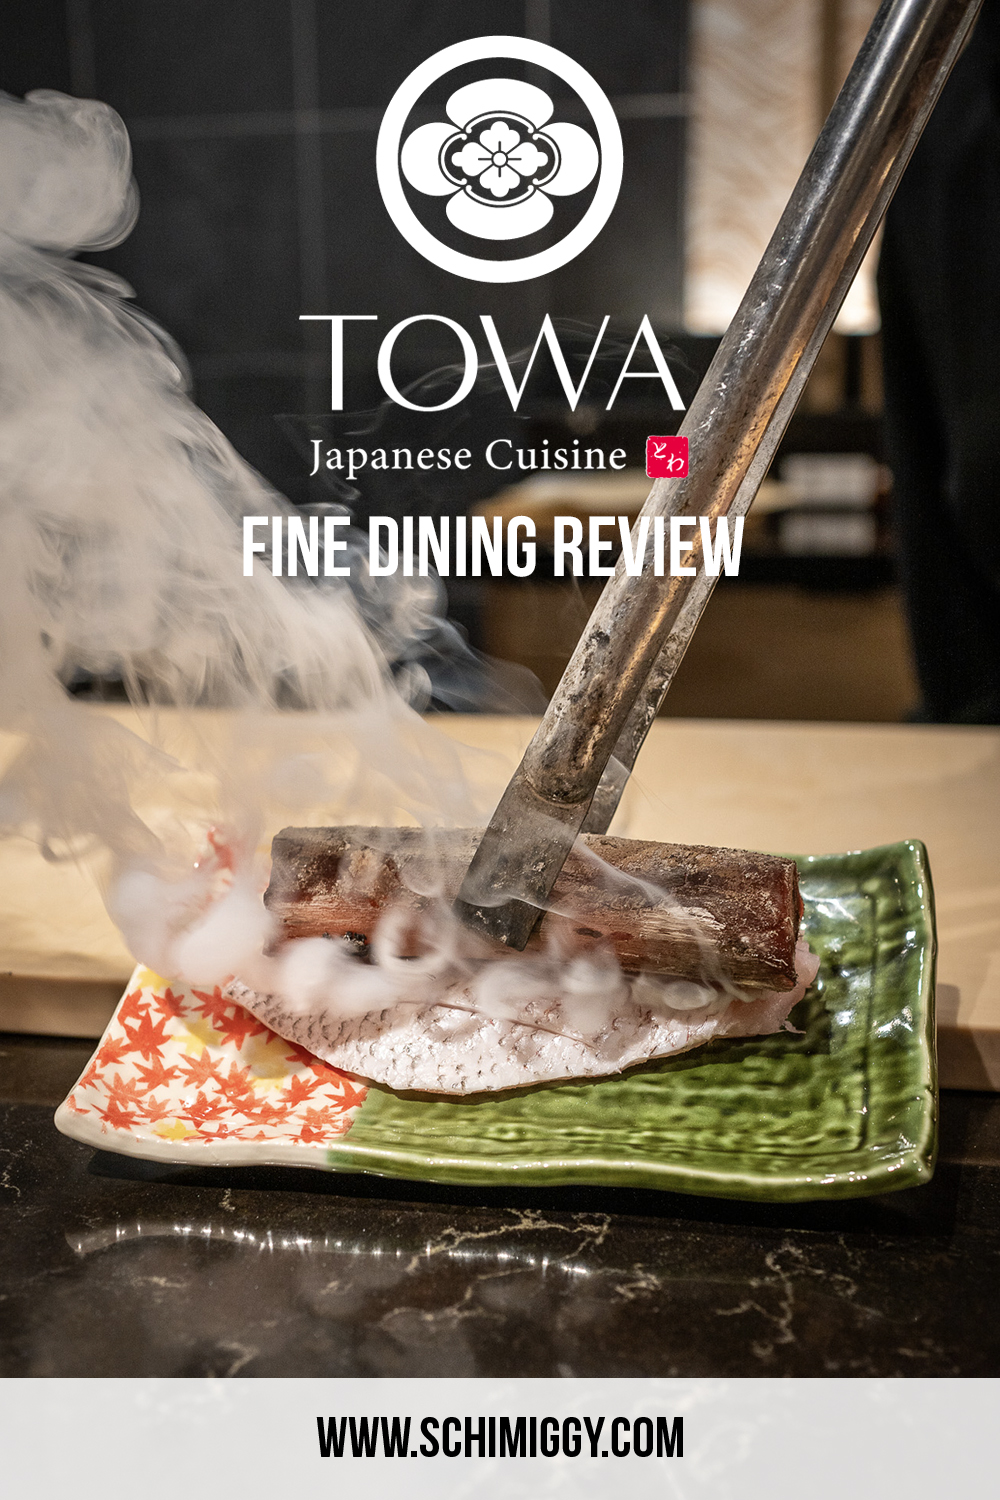 towa fine dining review schimiggy